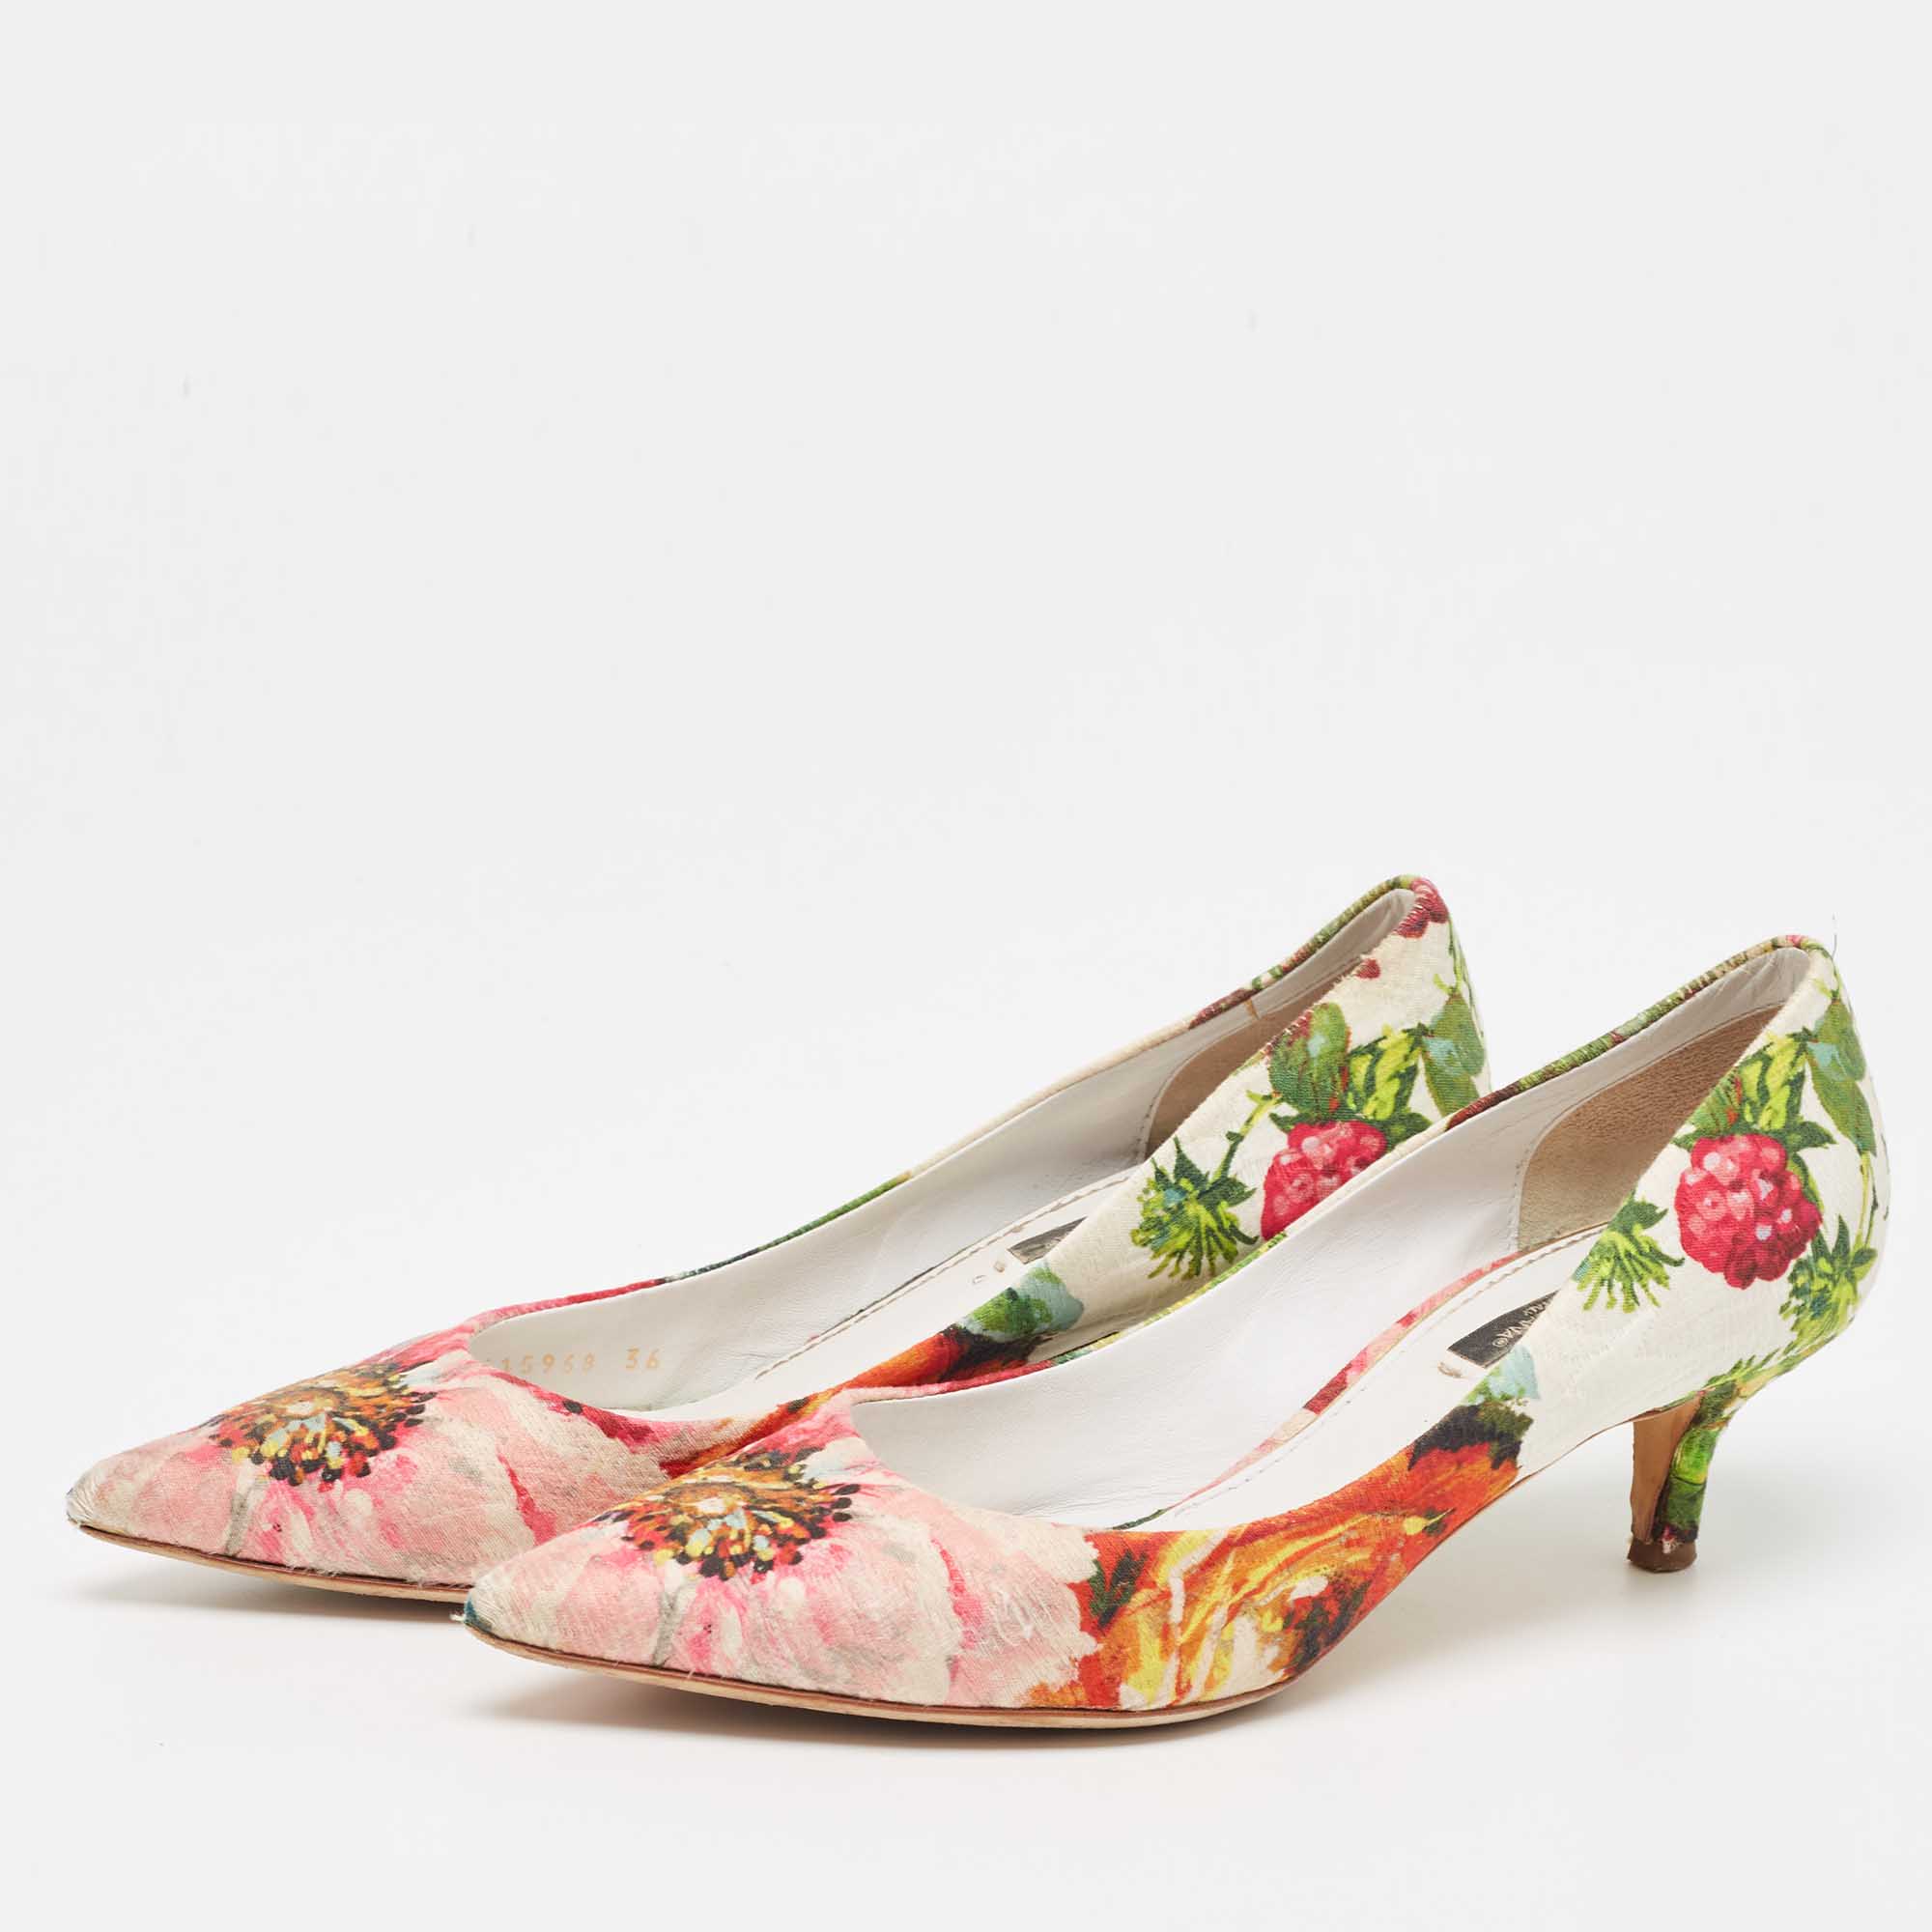 

Dolce & Gabbana Multicolor Brocade Fabric Floral Print Pointed Toe Pumps Size